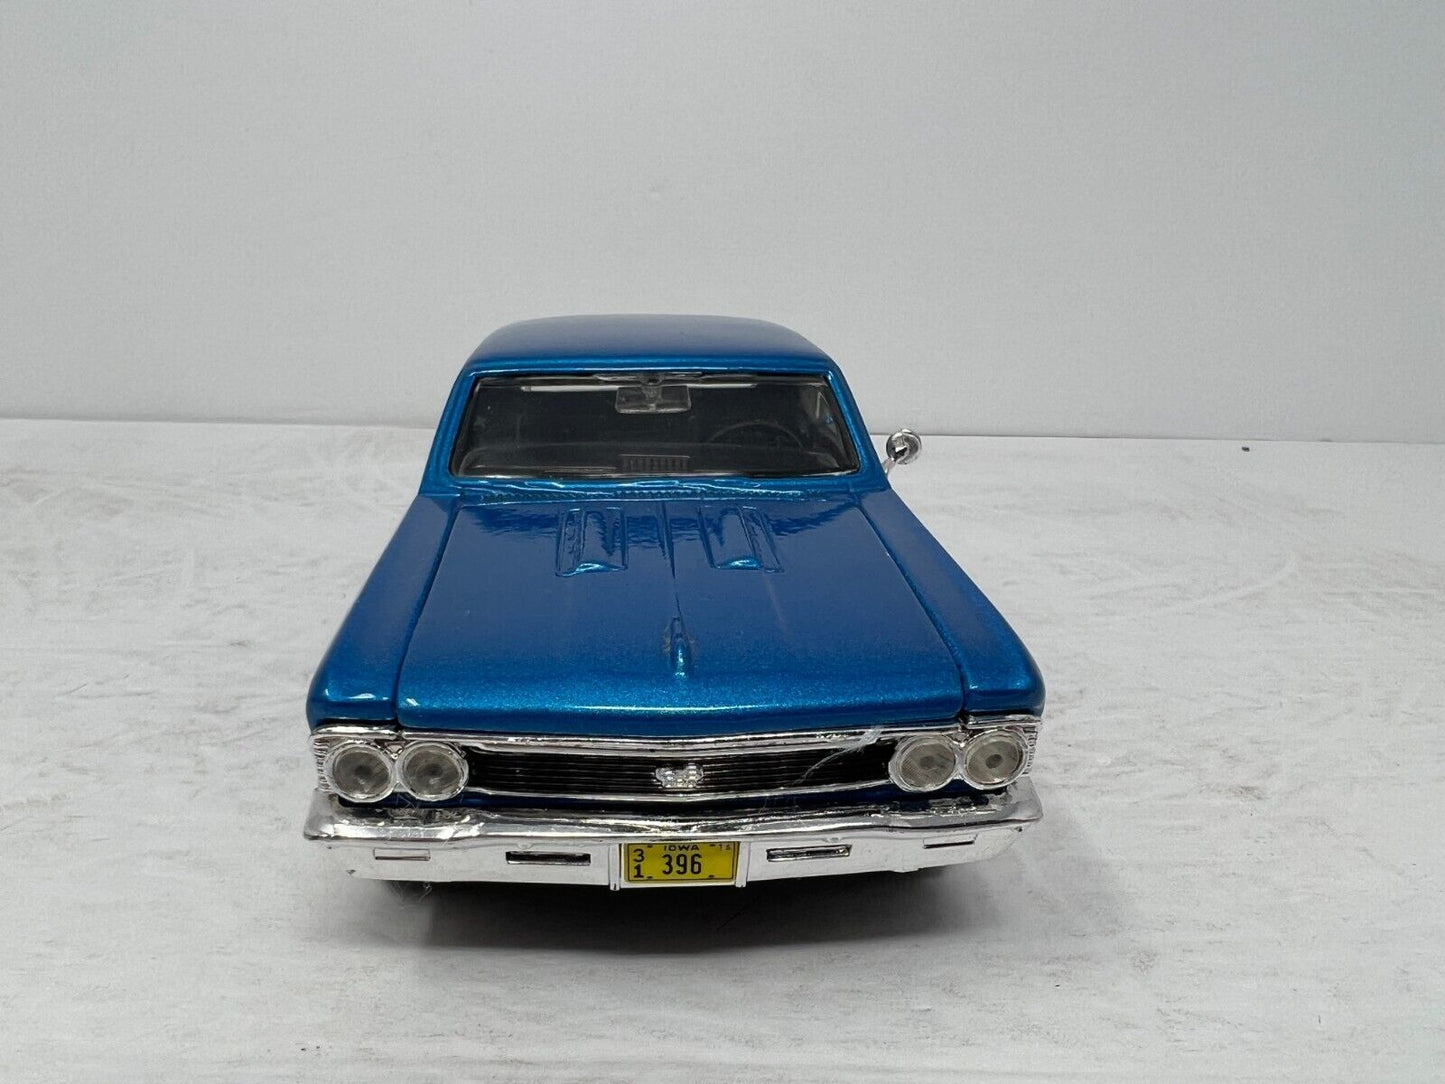 Maisto 1966 Chevrolet Chevelle SS 396 Hardtop Special Edition 1:24 Diecast